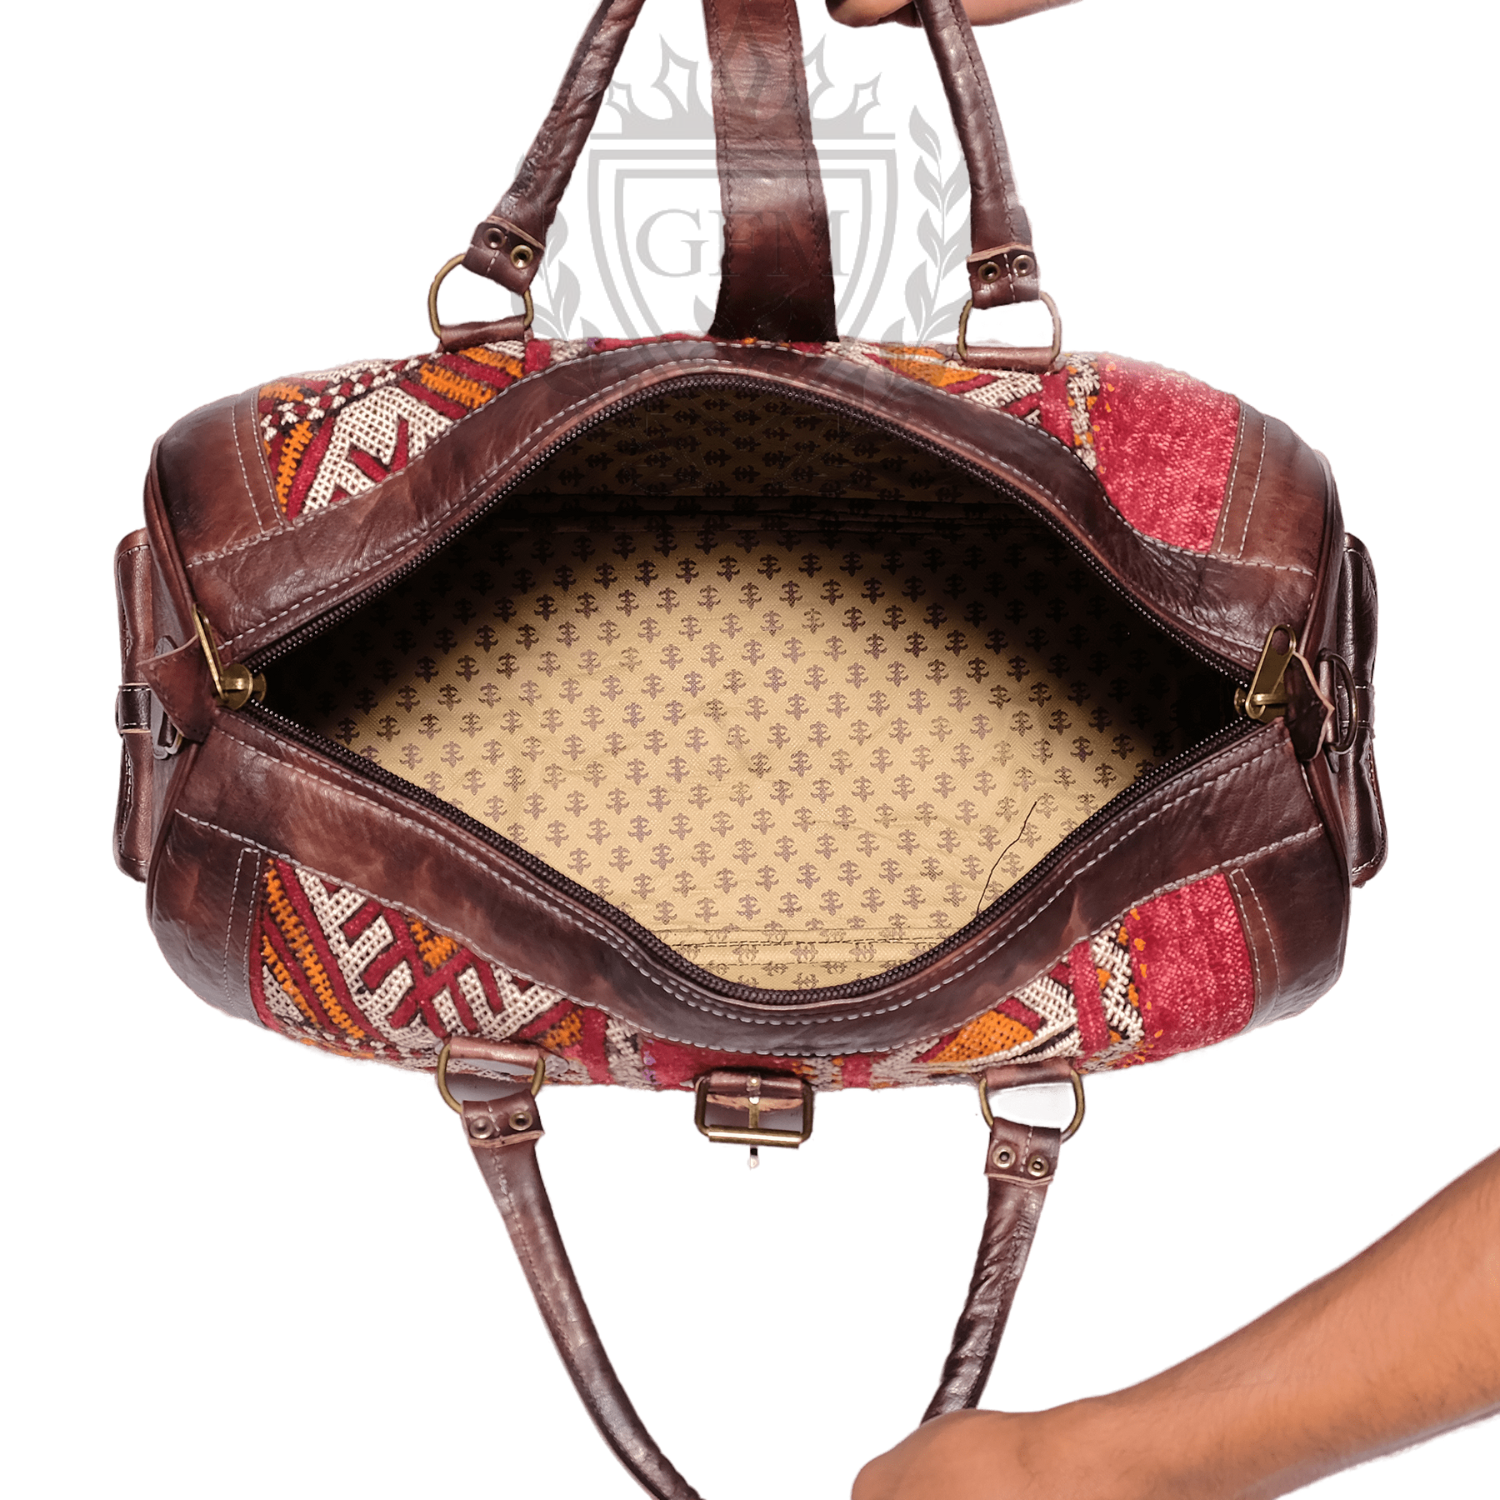 Authentic Moroccan Carpet Bag - Handmade and Handwoven